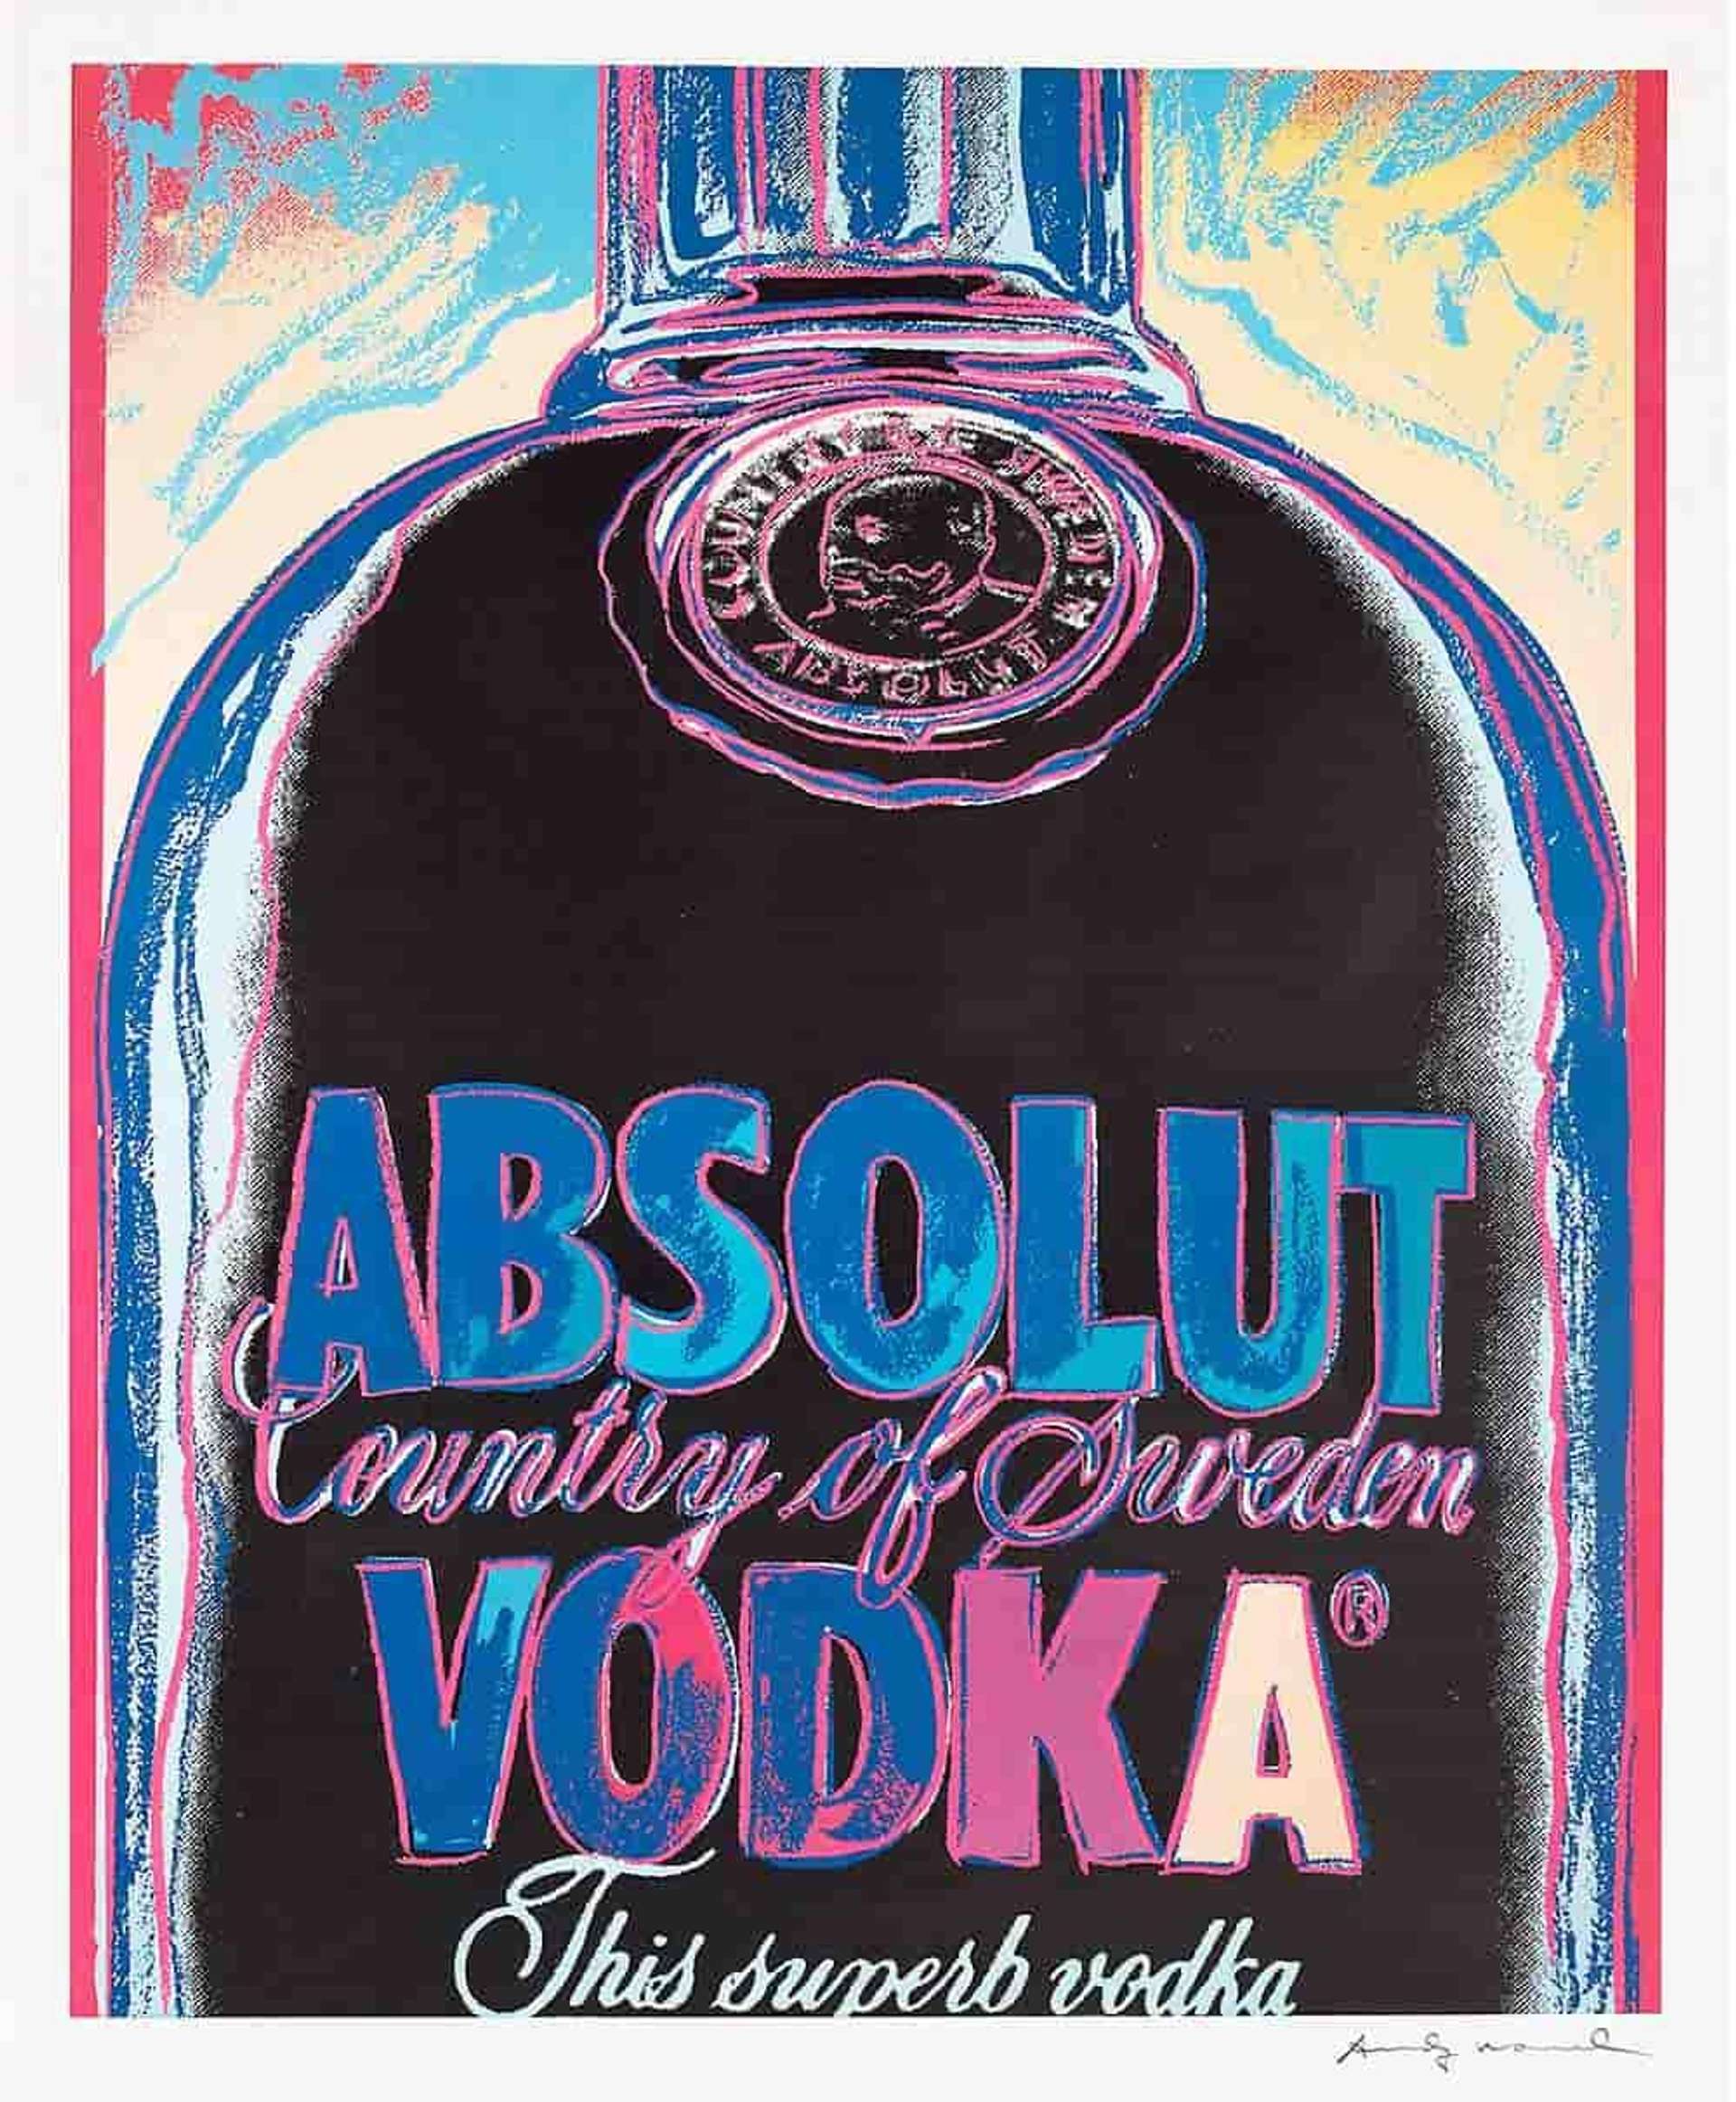 The image shows a bottle of Absolut Vodka rendered in Warhol’s signature Pop Art style, characterised by his use of bold colours. Warhol uses an abstract colour palette, applying a dark blue colour to the bottle which is set against a yellow backdrop. The brand’s name is written in big blue letters and outlined in purple which draws attention towards the brand.